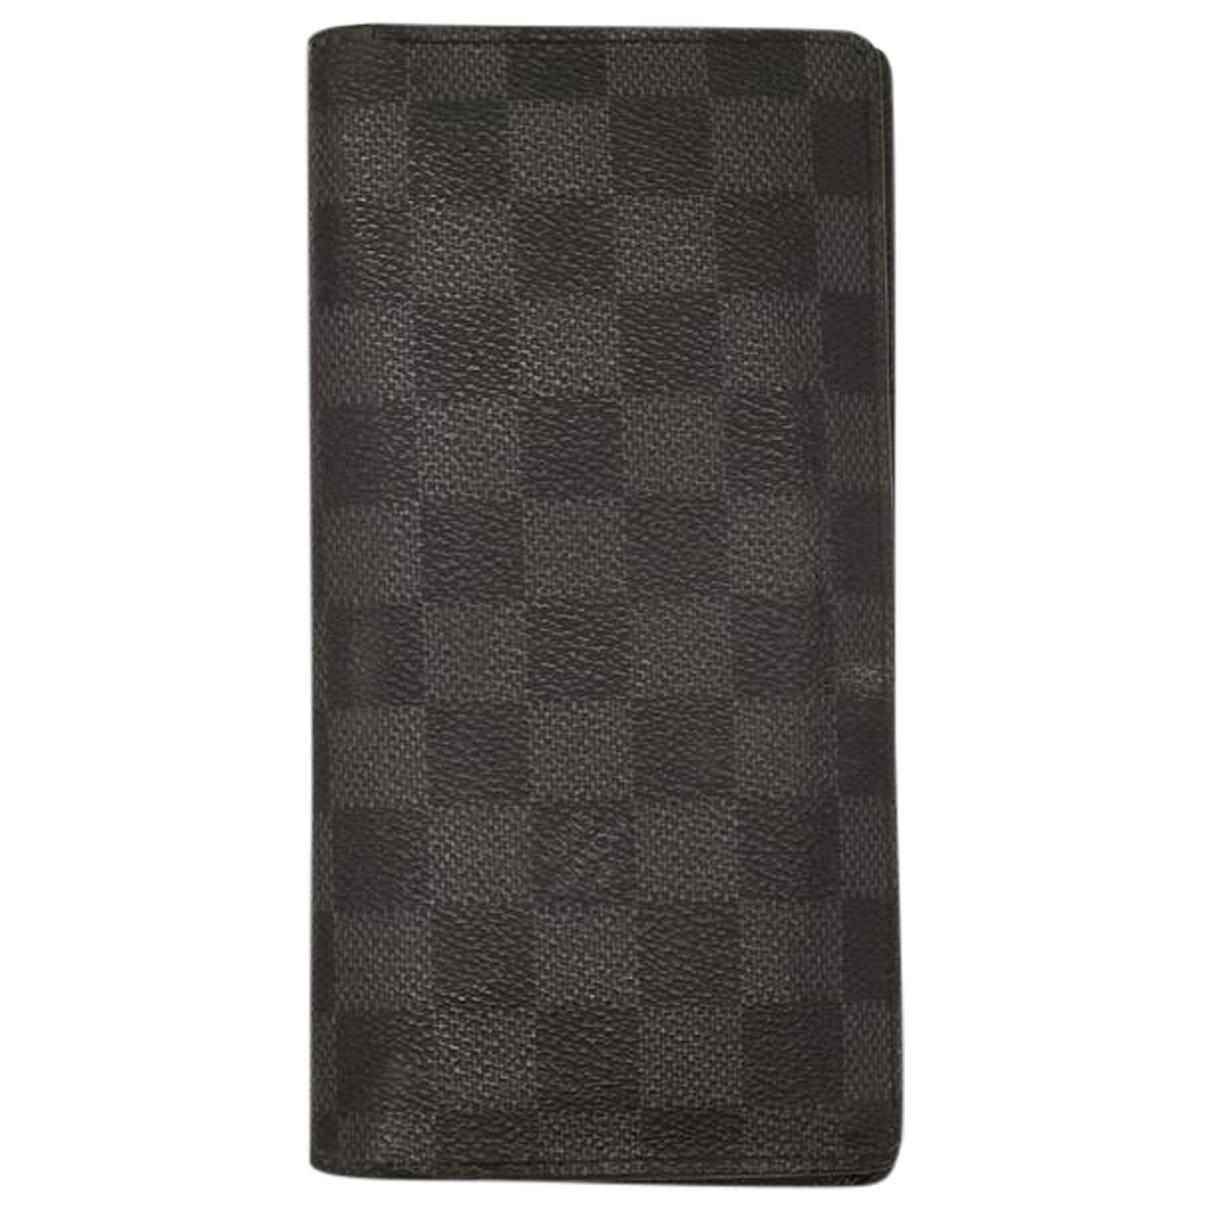 Insolite cloth wallet Louis Vuitton Green in Cloth - 34881455